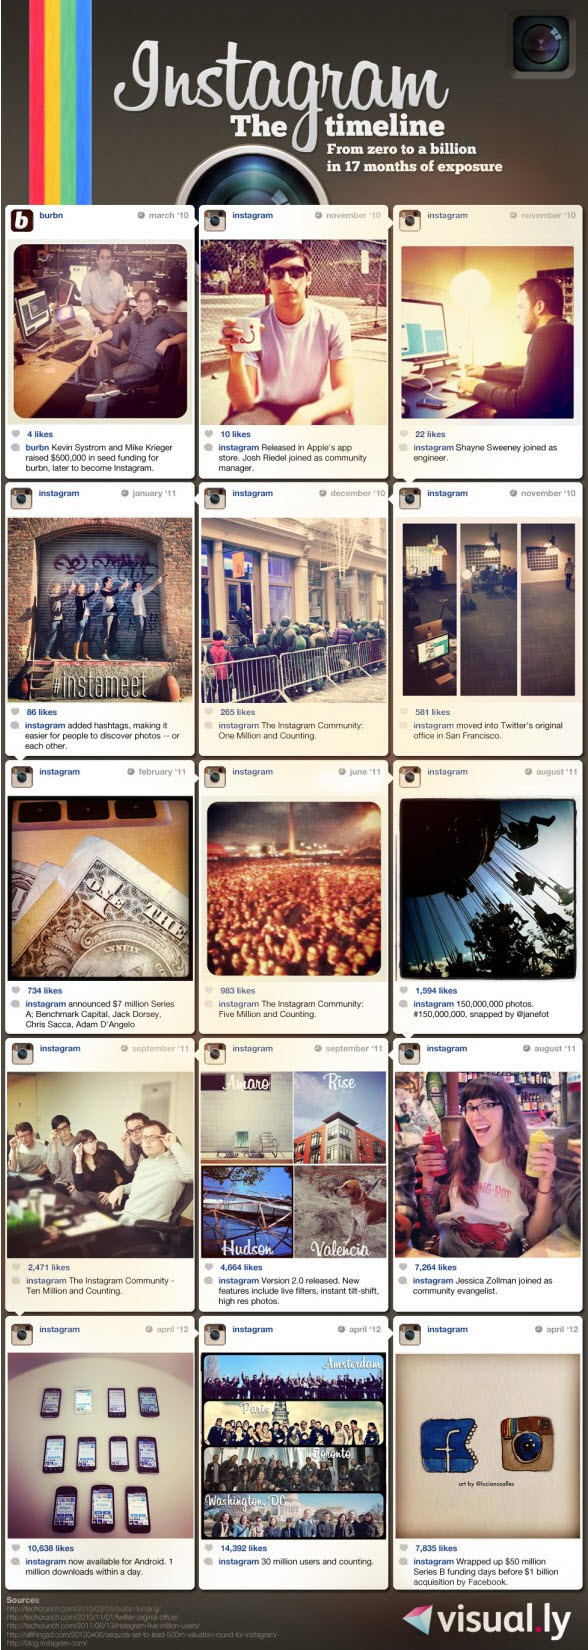 Instagram 2012 Infographic Facts Figures and statistics